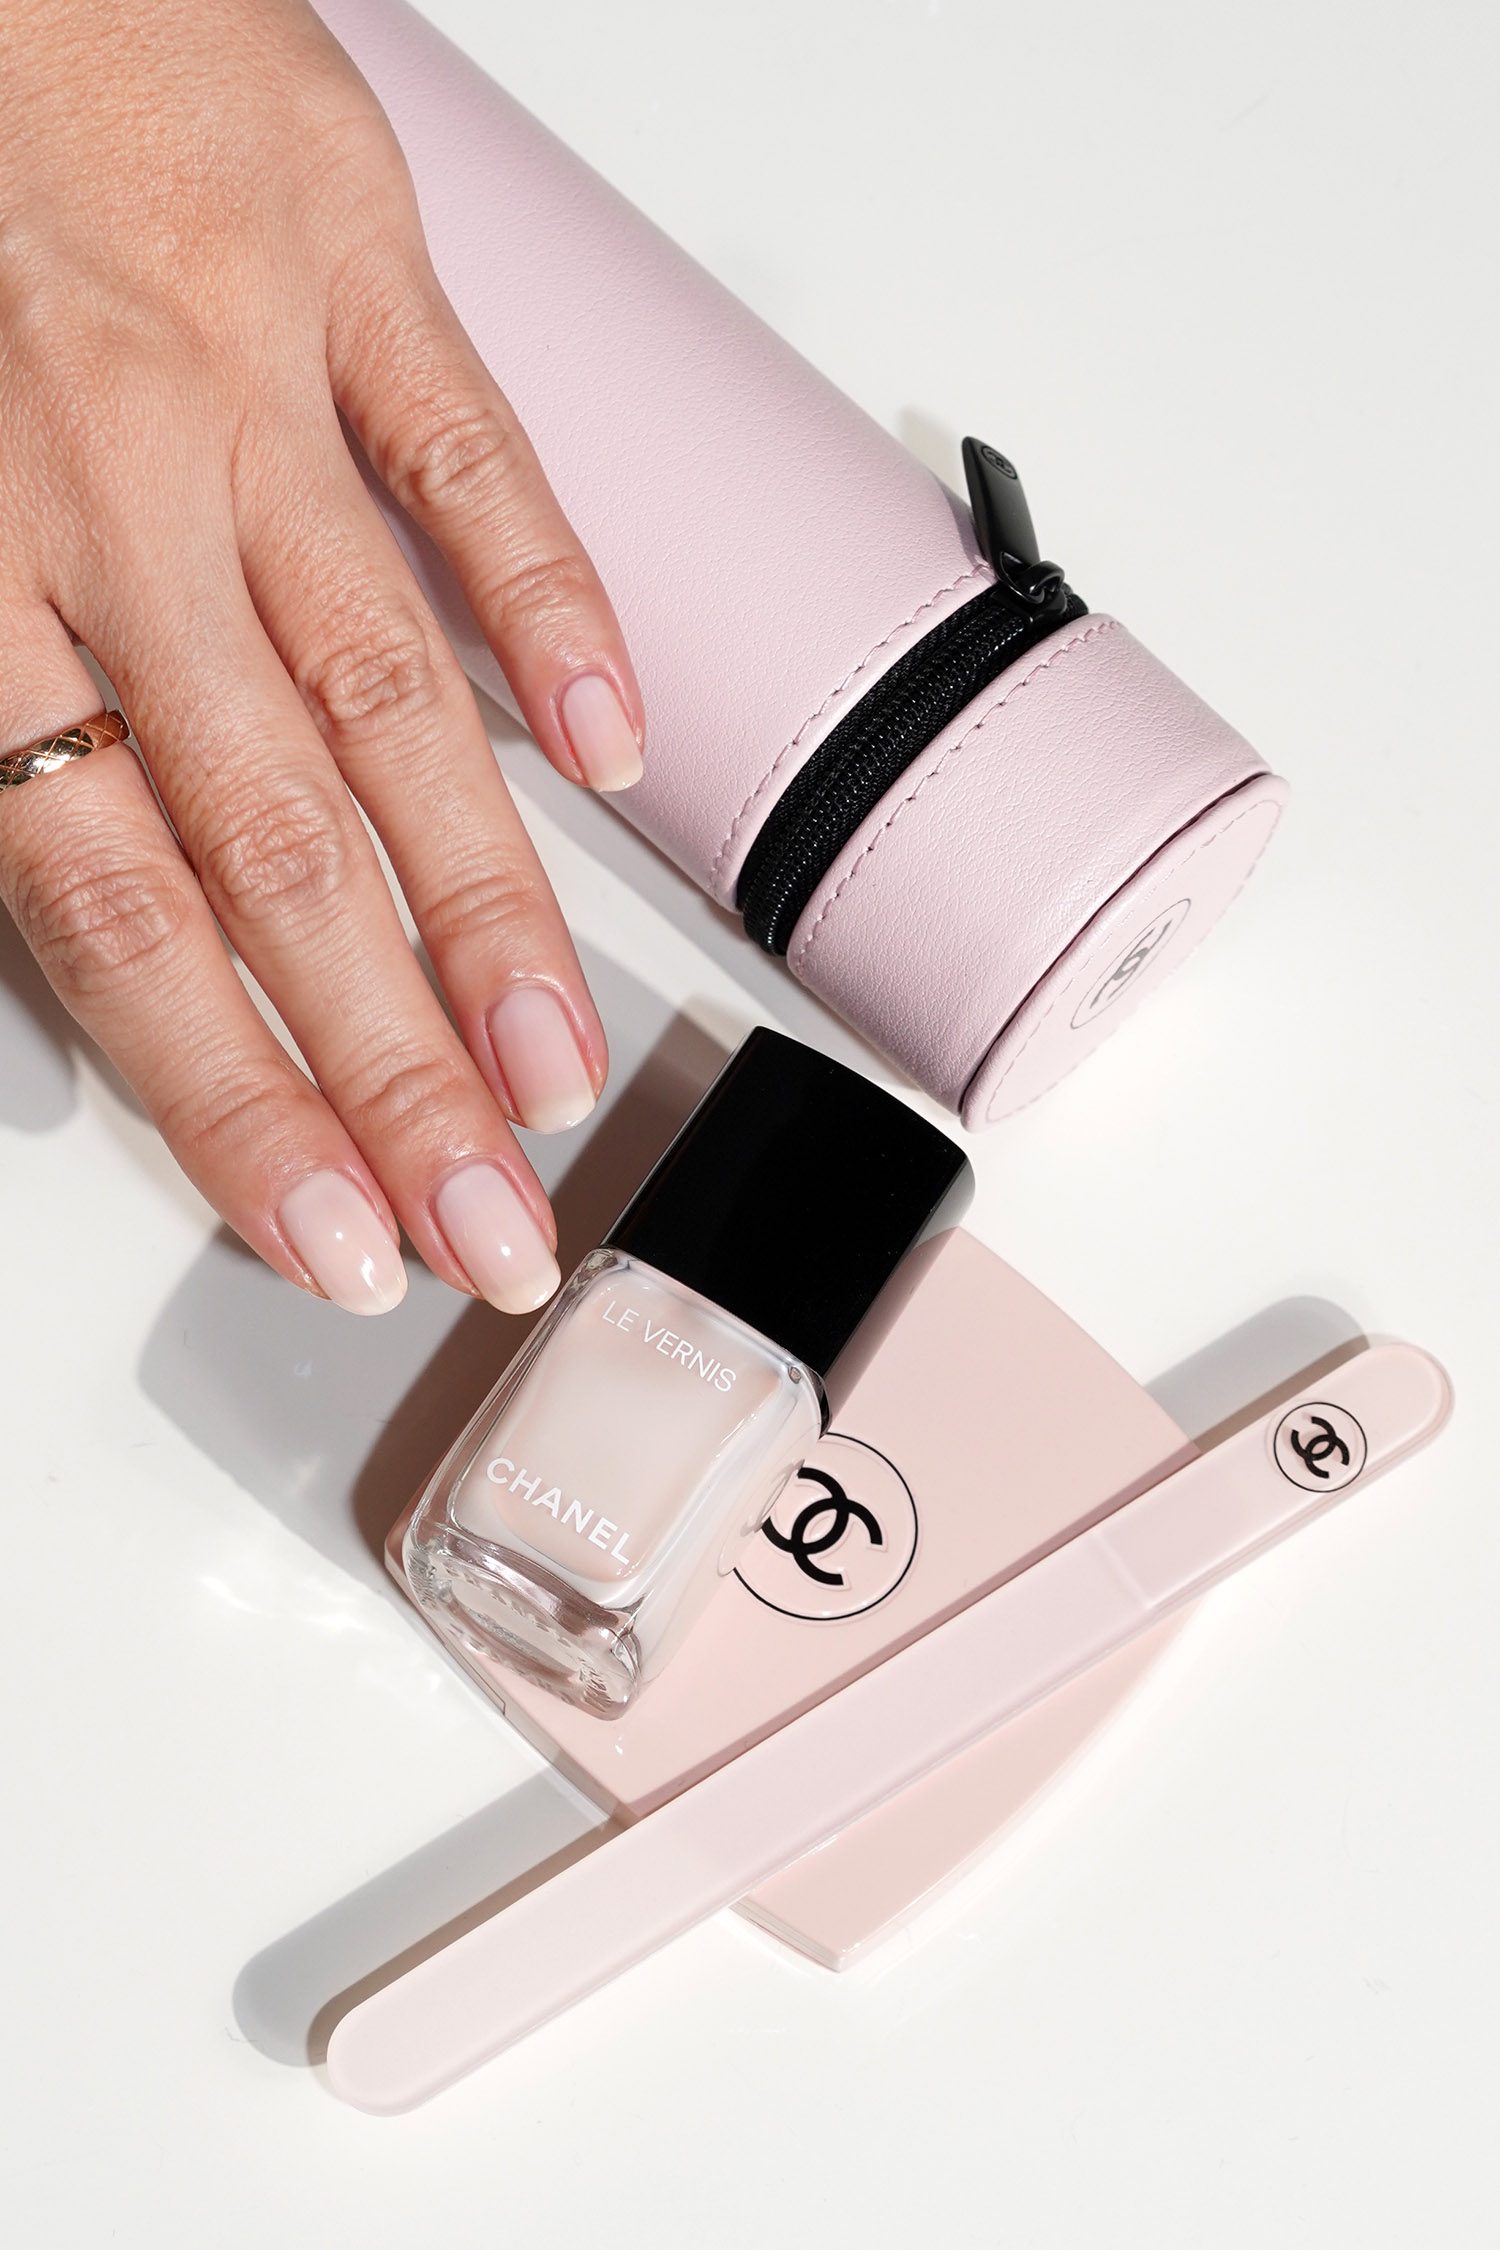 Chanel codes couleur in Immortelle and ballerina pink. Brush set, mirror,  and nail file 